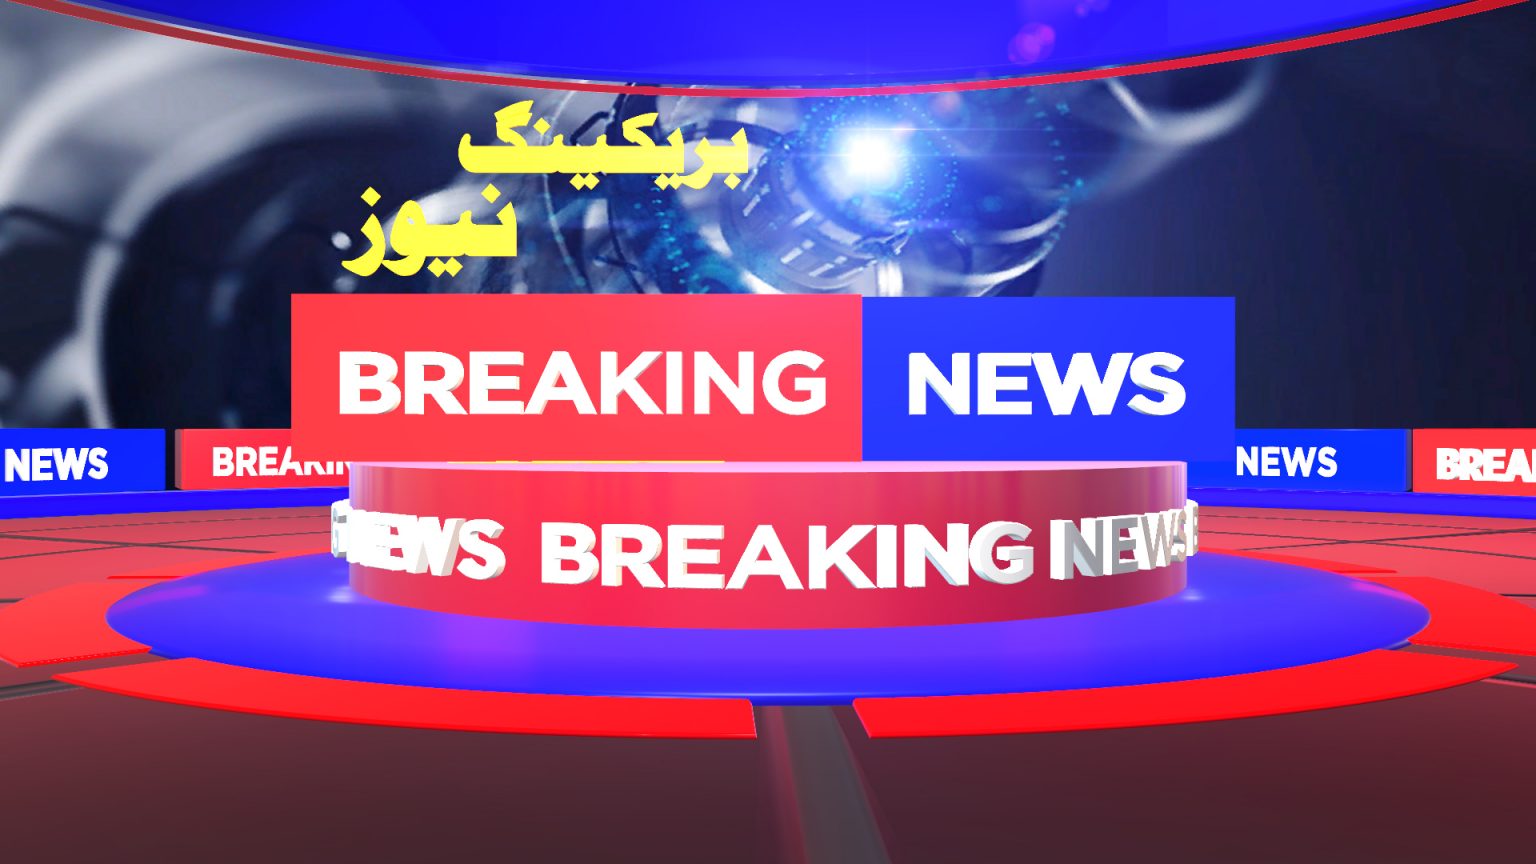 breaking news after effects project free download